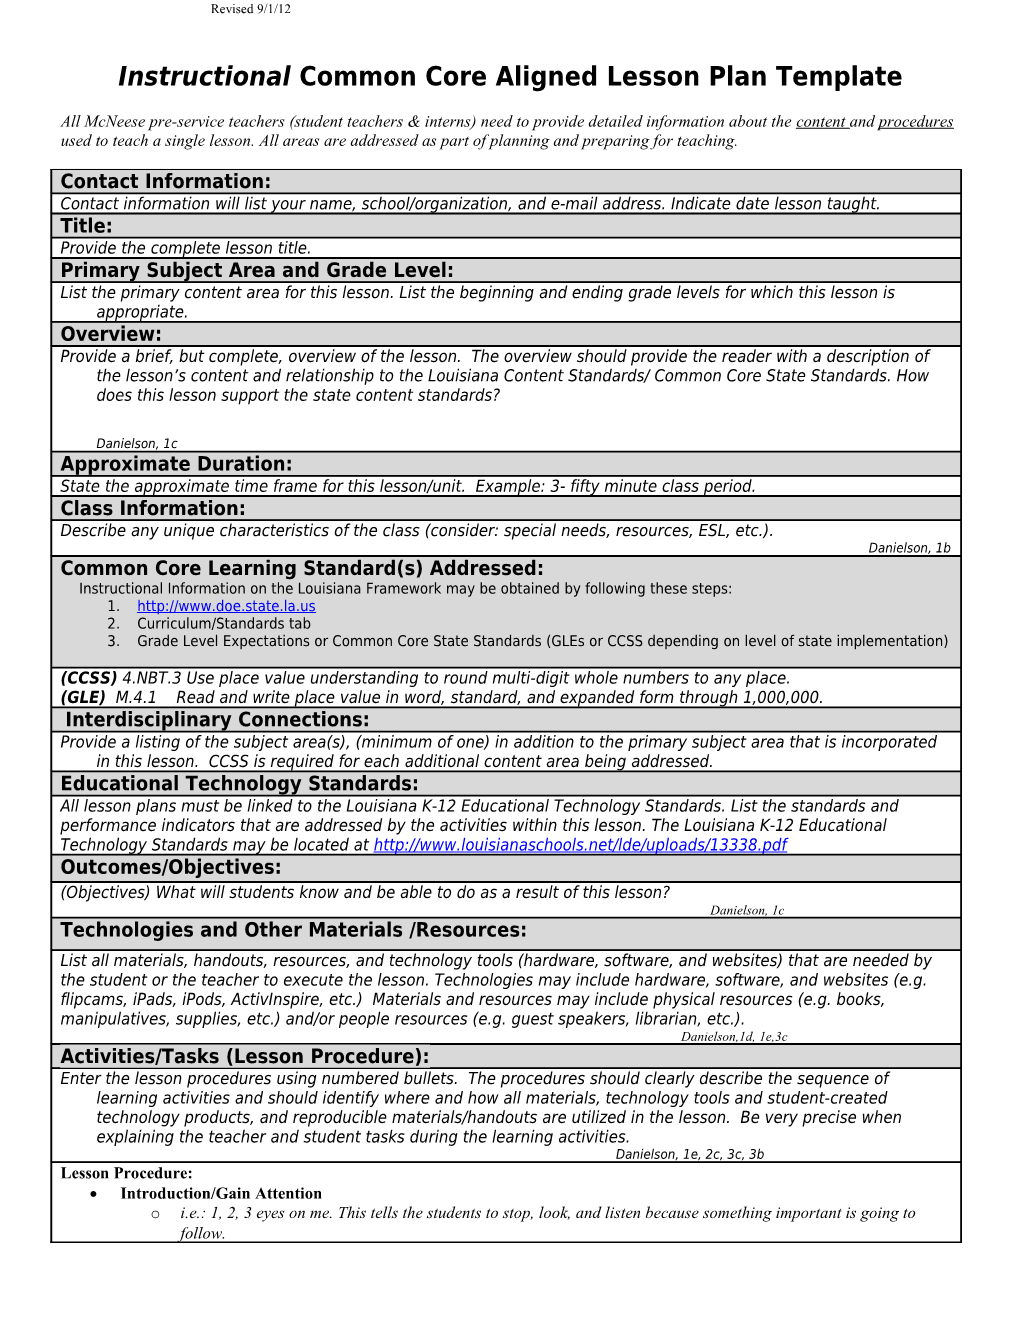 Making Connections Lesson Plan Template s1